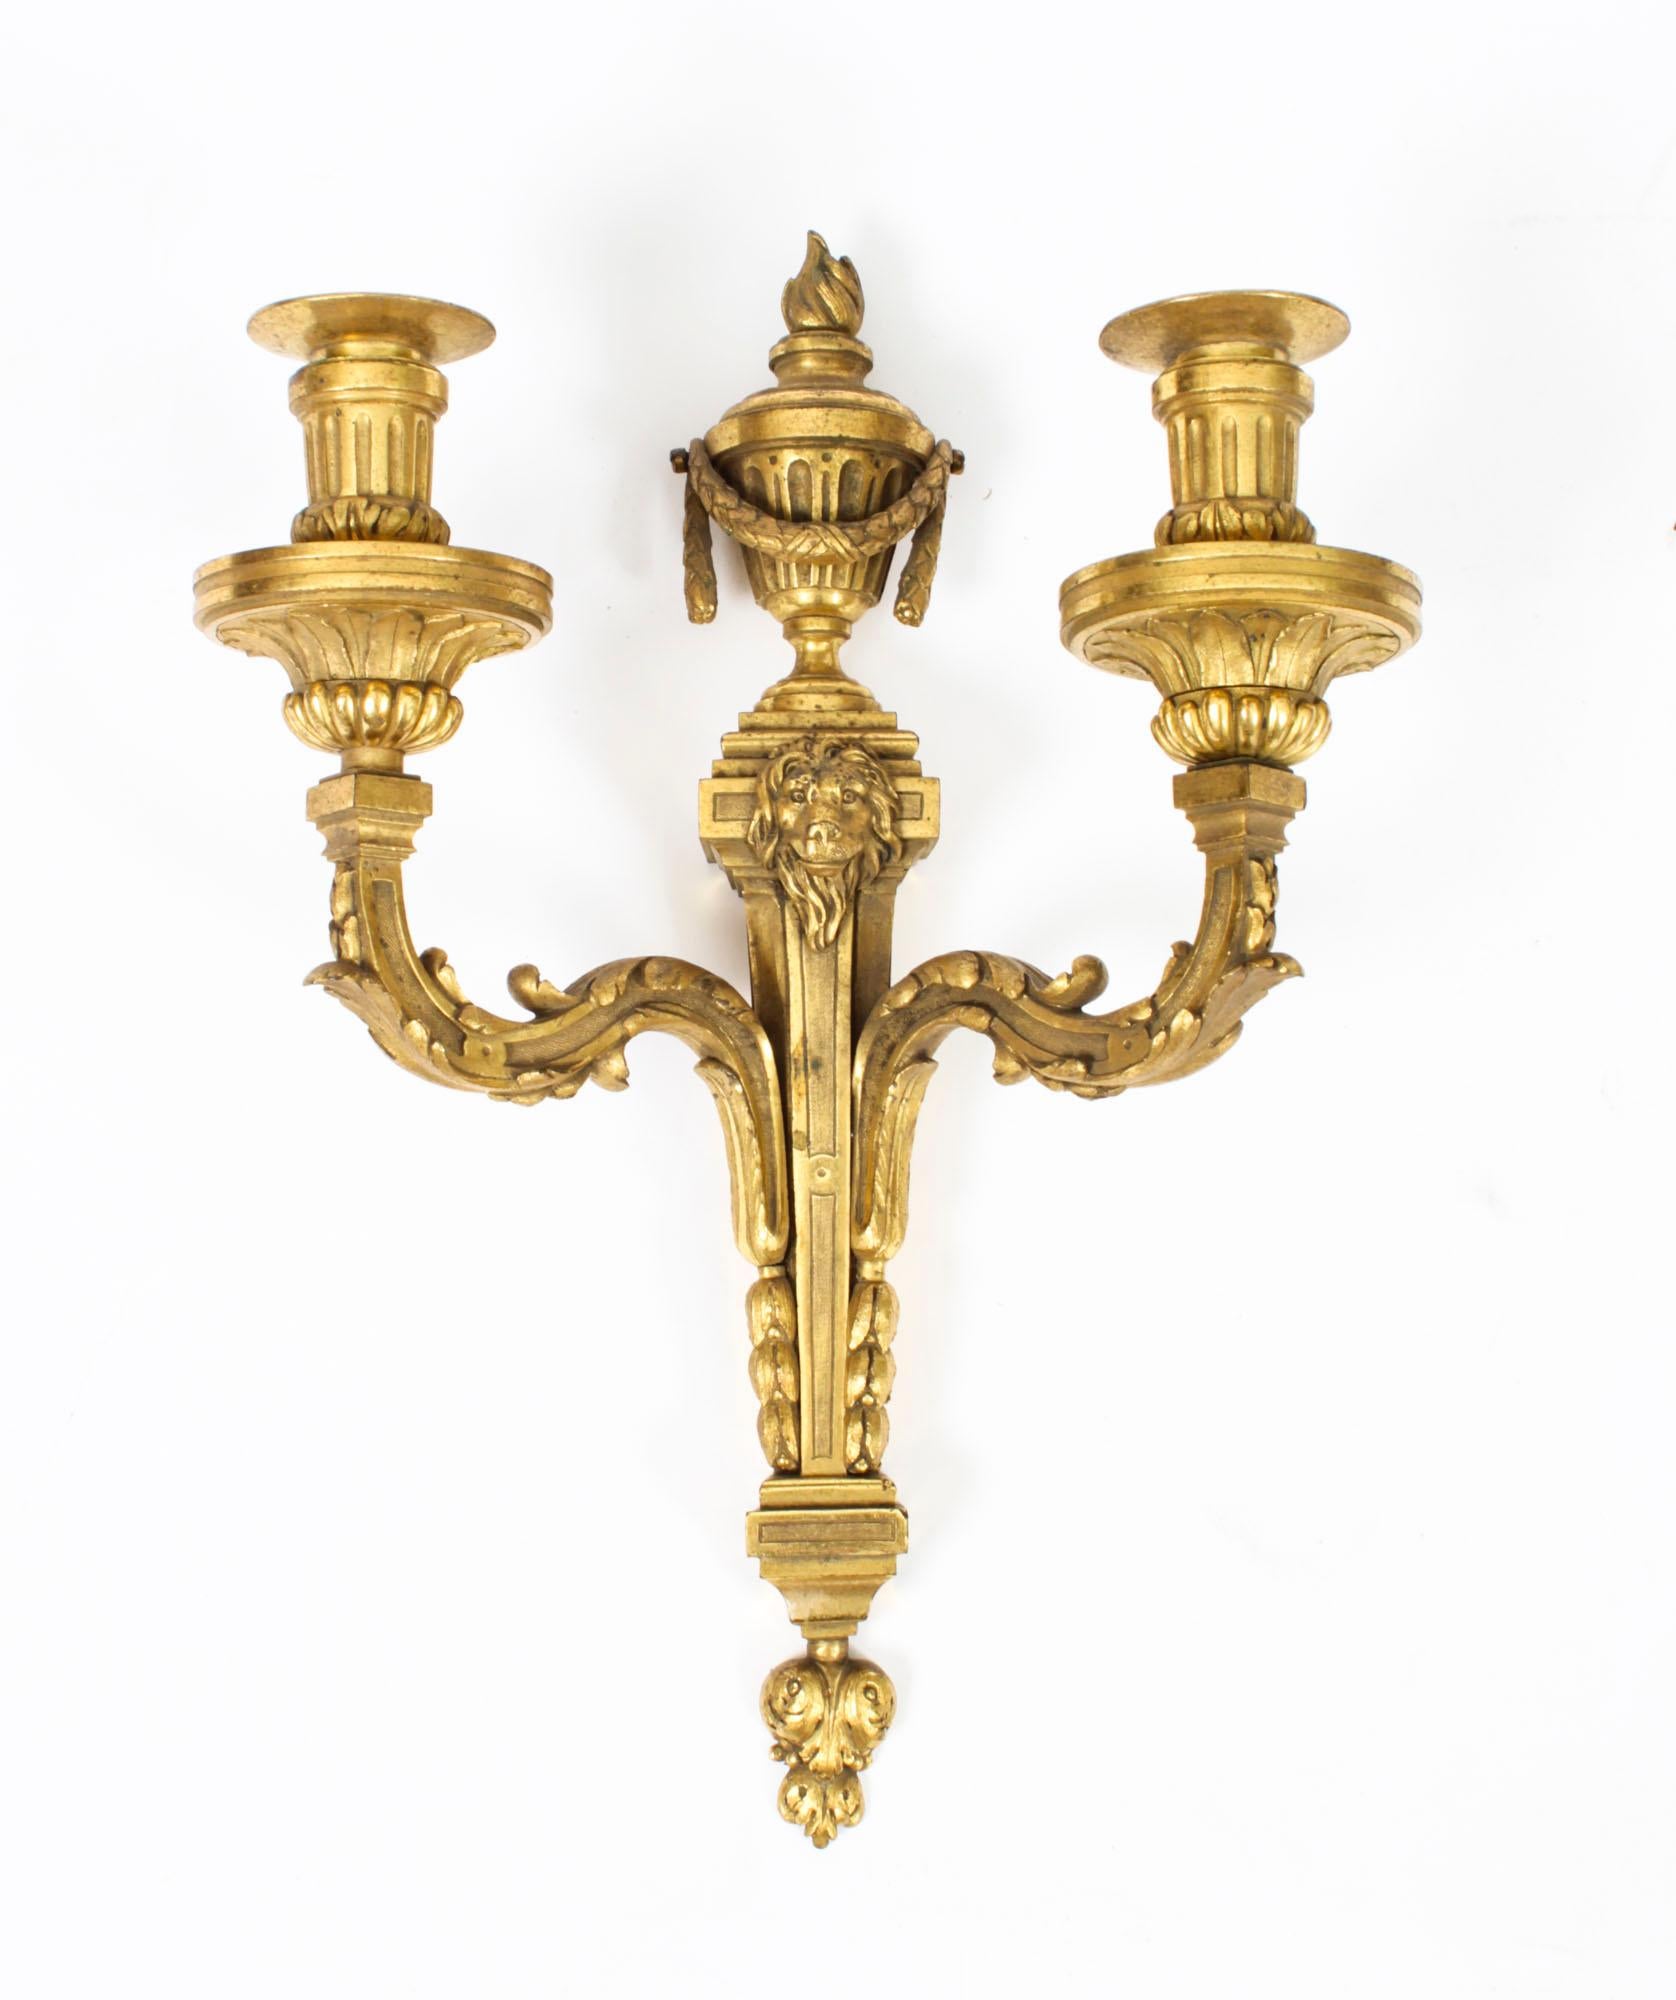 Antique Pair Regency Revival Ormolu Wall Lights Appliques Mid 19th Century In Good Condition For Sale In London, GB